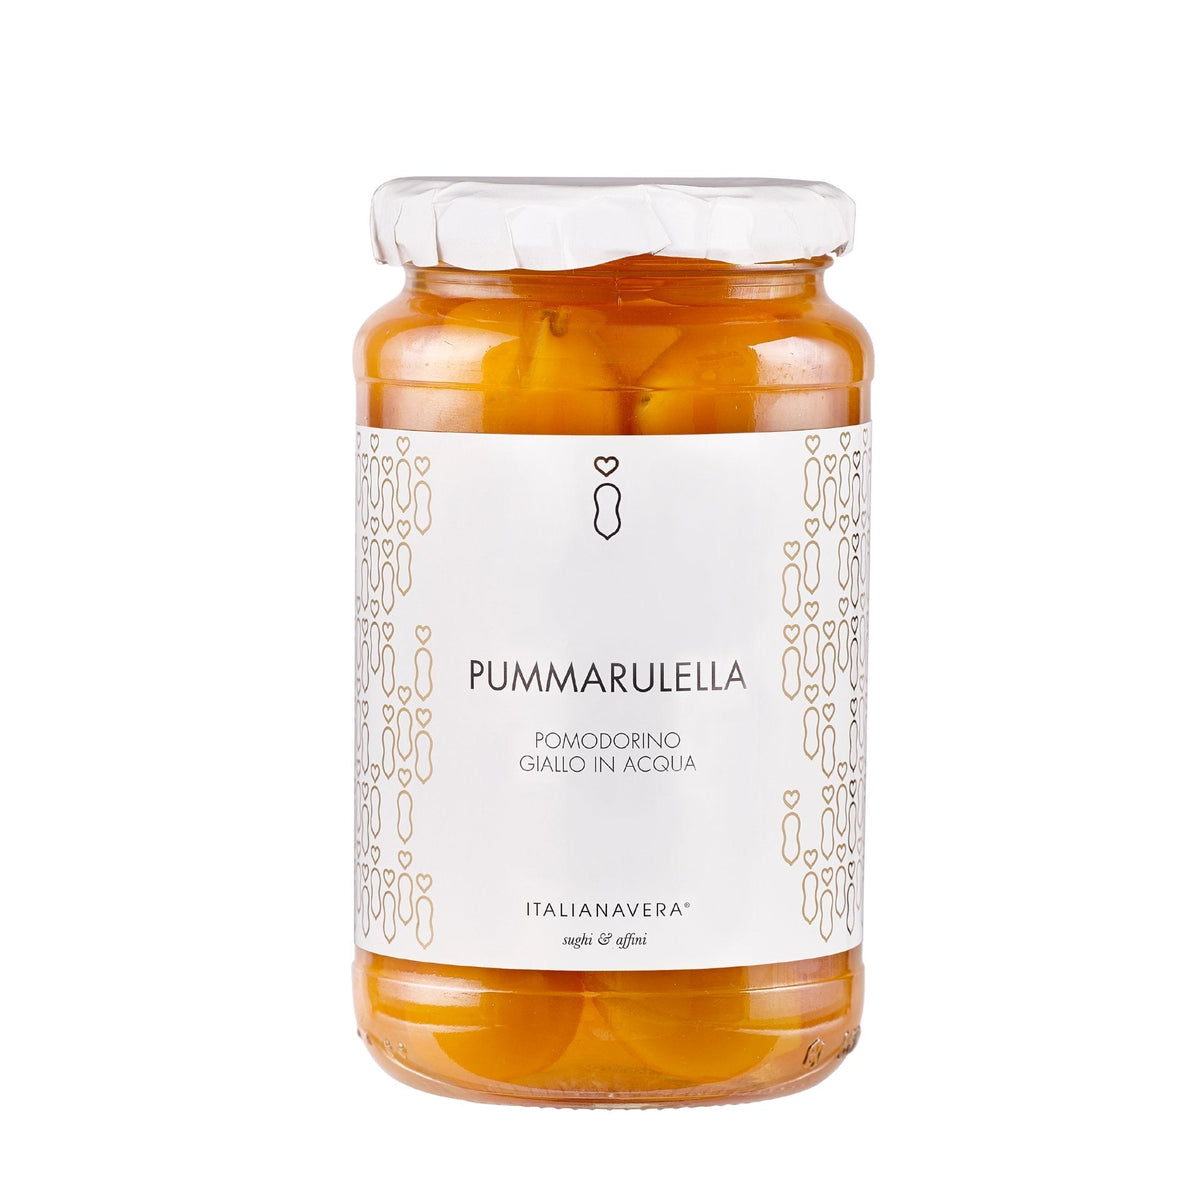 Italianavera Pummarulella Yellow Cherry Tomato 520g (glass jar)  | Imported and distributed in the UK by Just Gourmet Foods